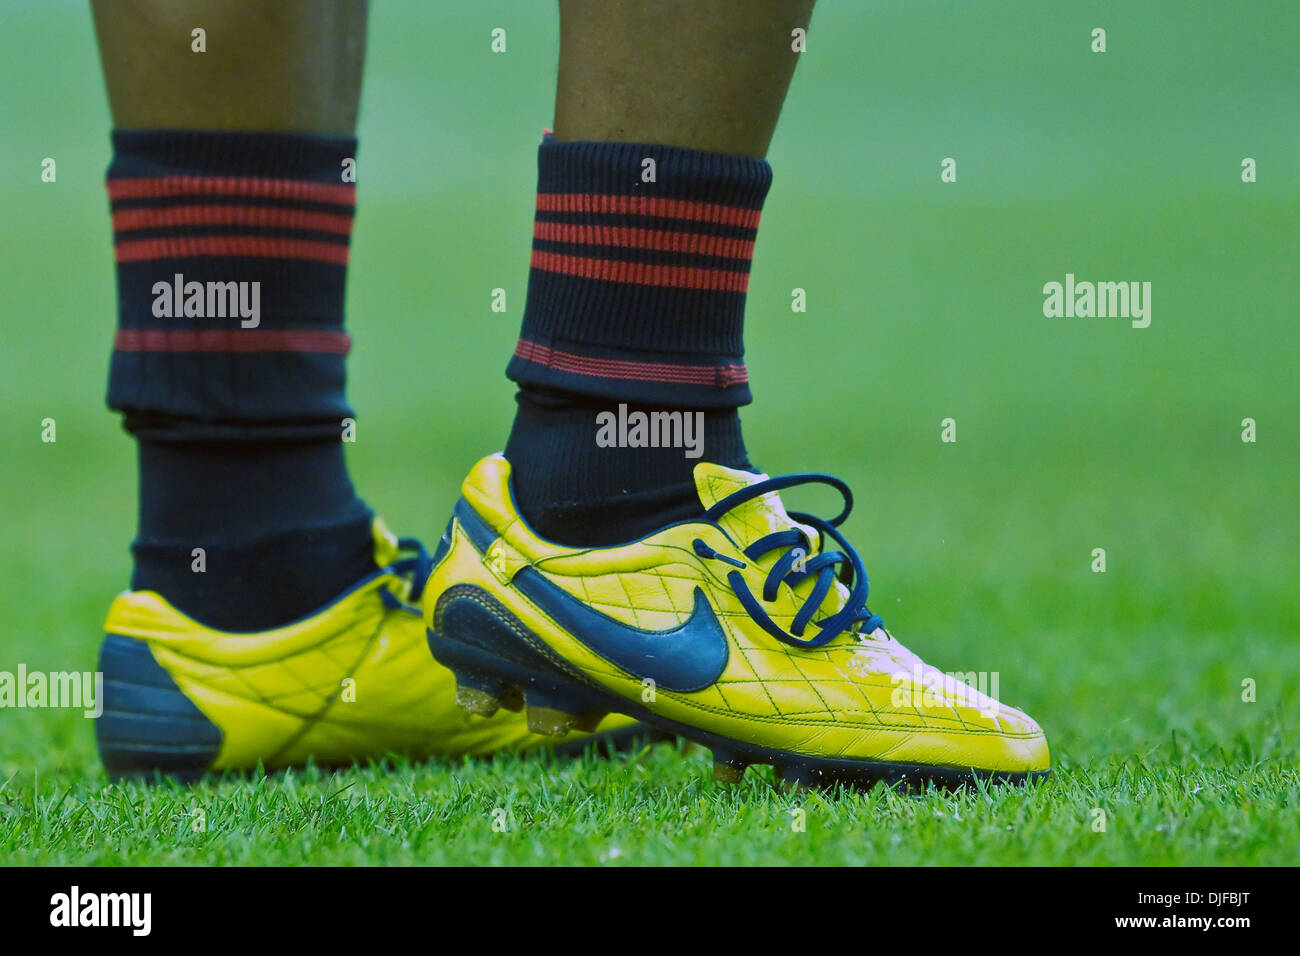 AC Milan's forward Ronaldo (Ronaldinho) De Assis Moreira's(#80) shoes during play of the friendly FIFA exhibition game between AC Milan and the Montreal Imapct played at the Olympic Stadium in Montreal, Canada. (Credit Image: © Leon Switzer/Southcreek Global/ZUMApress.com) Stock Photo